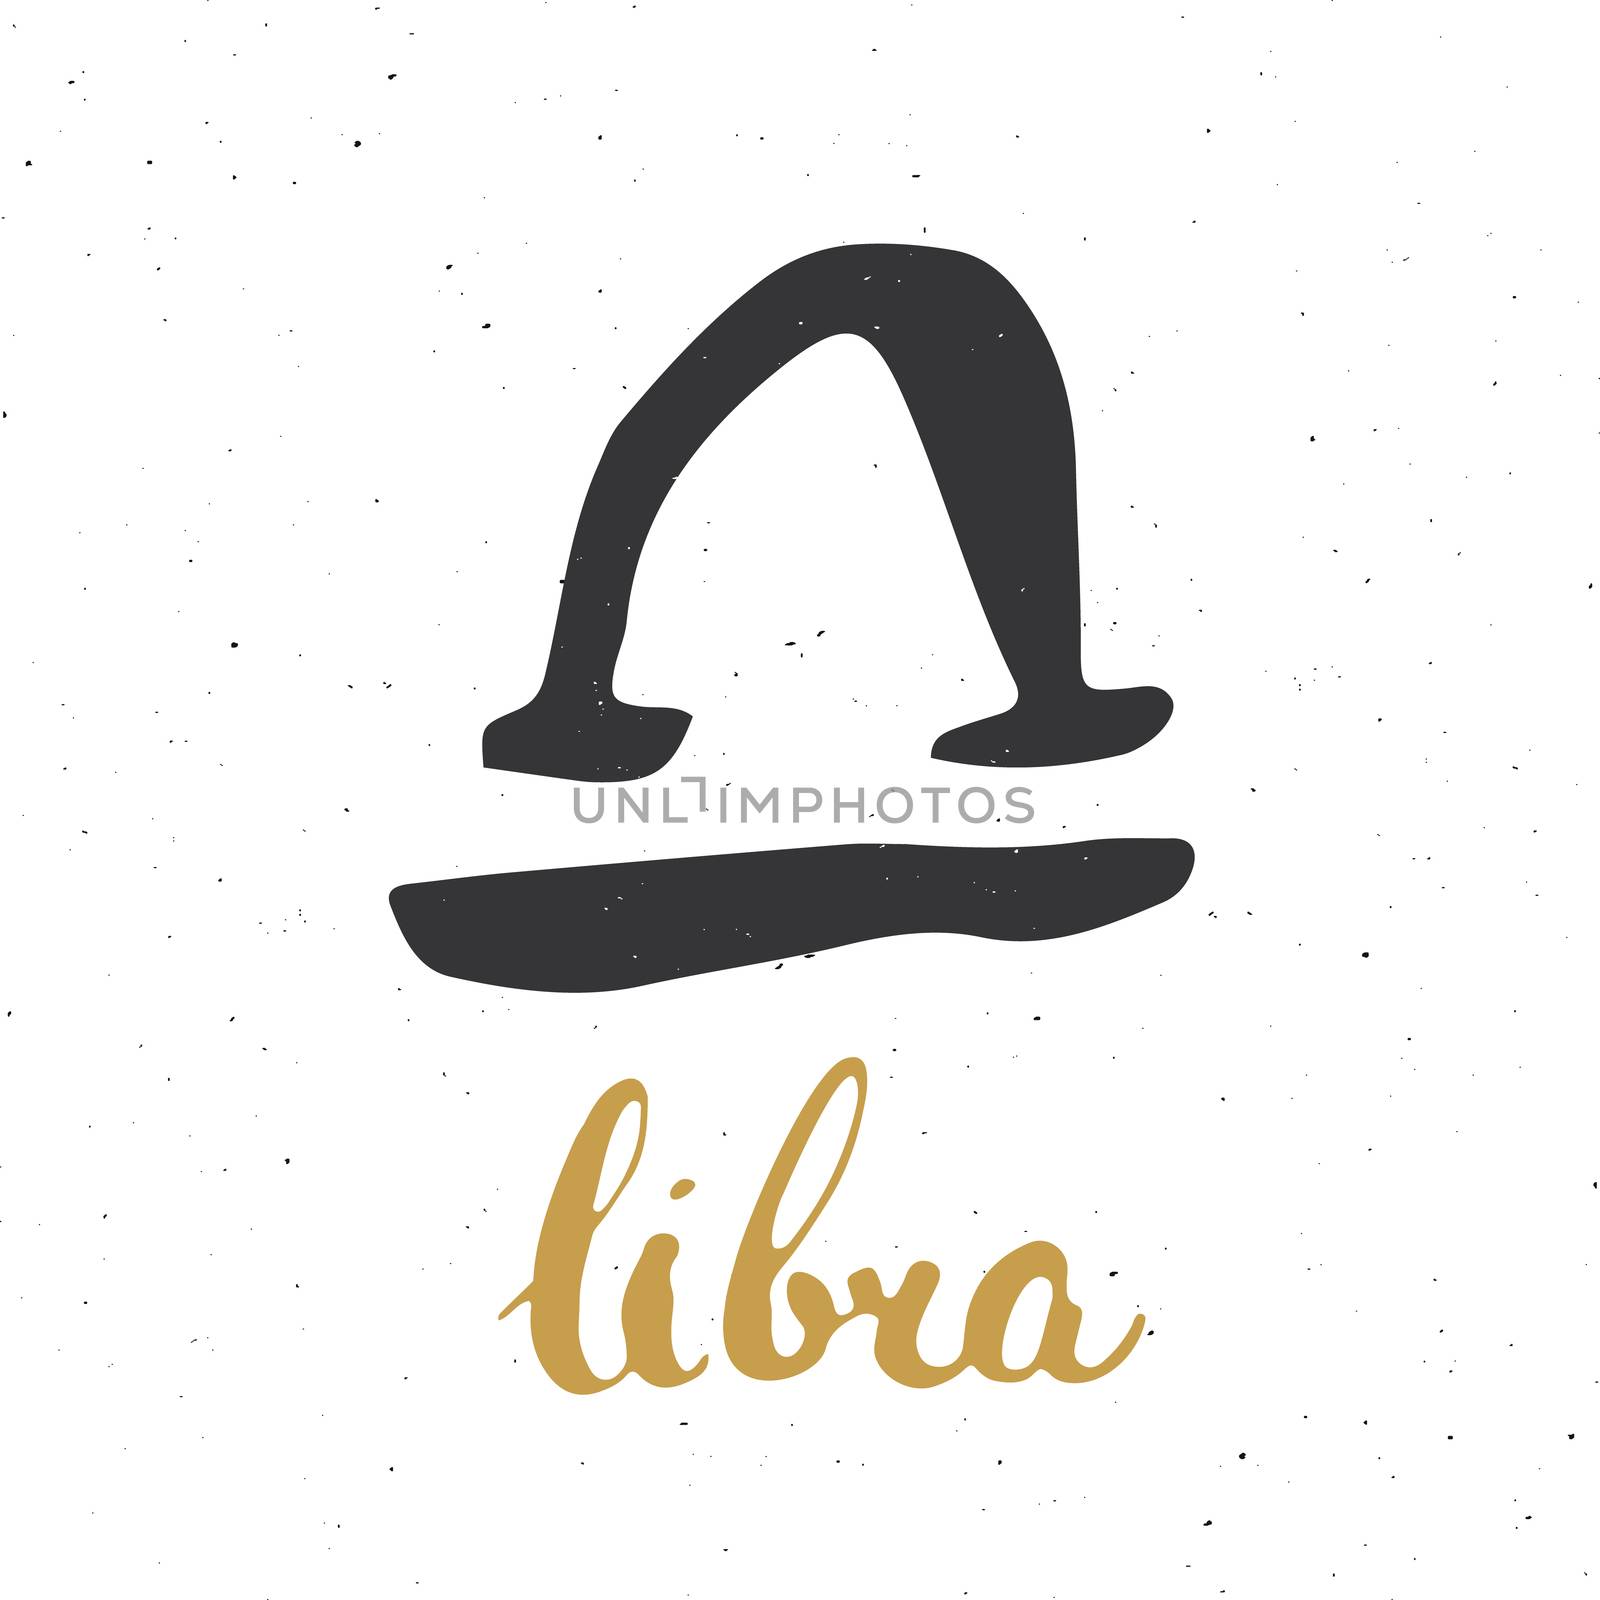 Zodiac sign Libra and lettering. Hand drawn horoscope astrology symbol, grunge textured design, typography print, vector illustration .